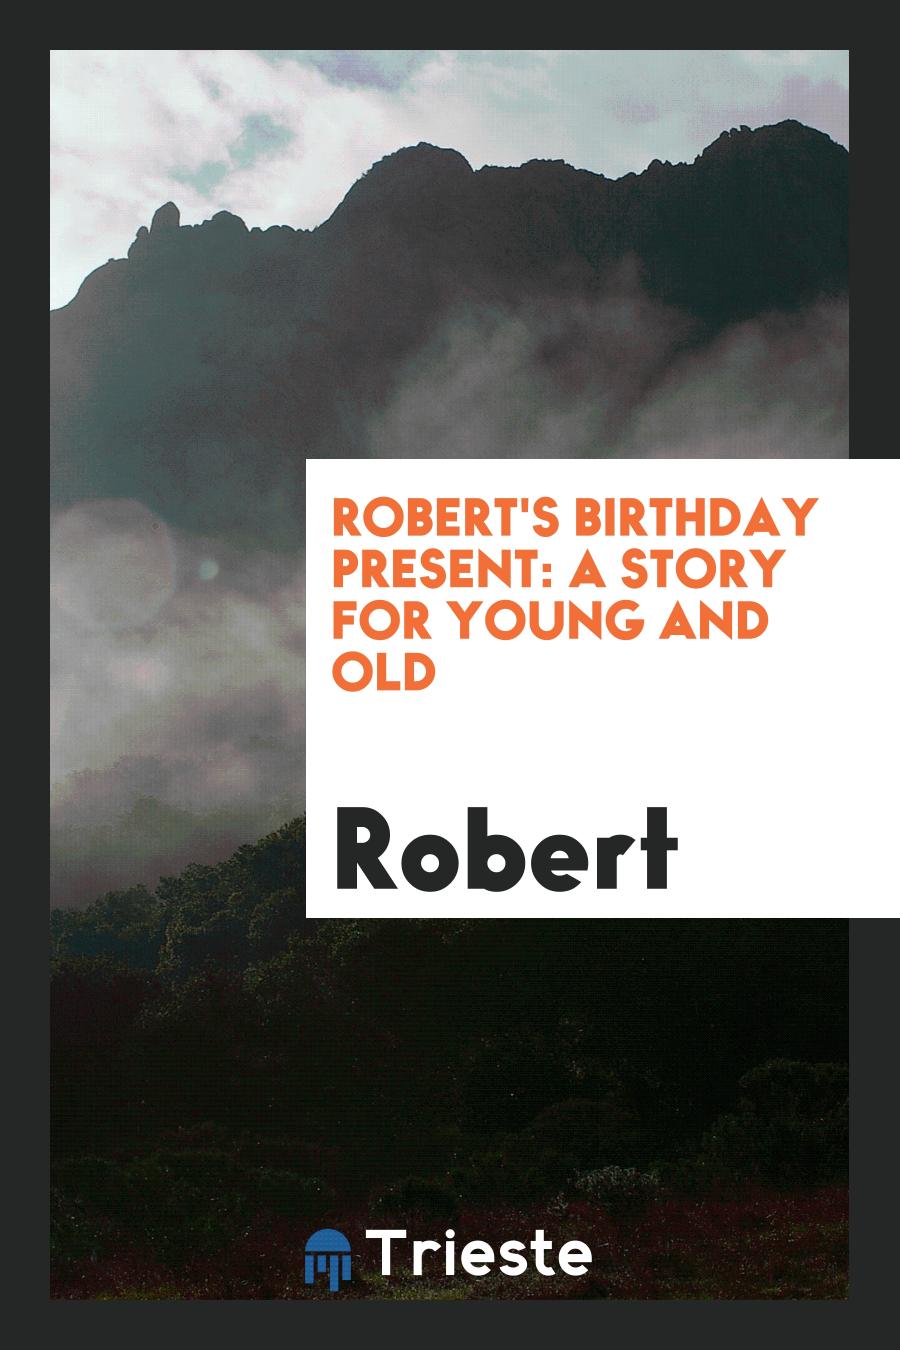 Robert's Birthday Present: A Story for Young and Old